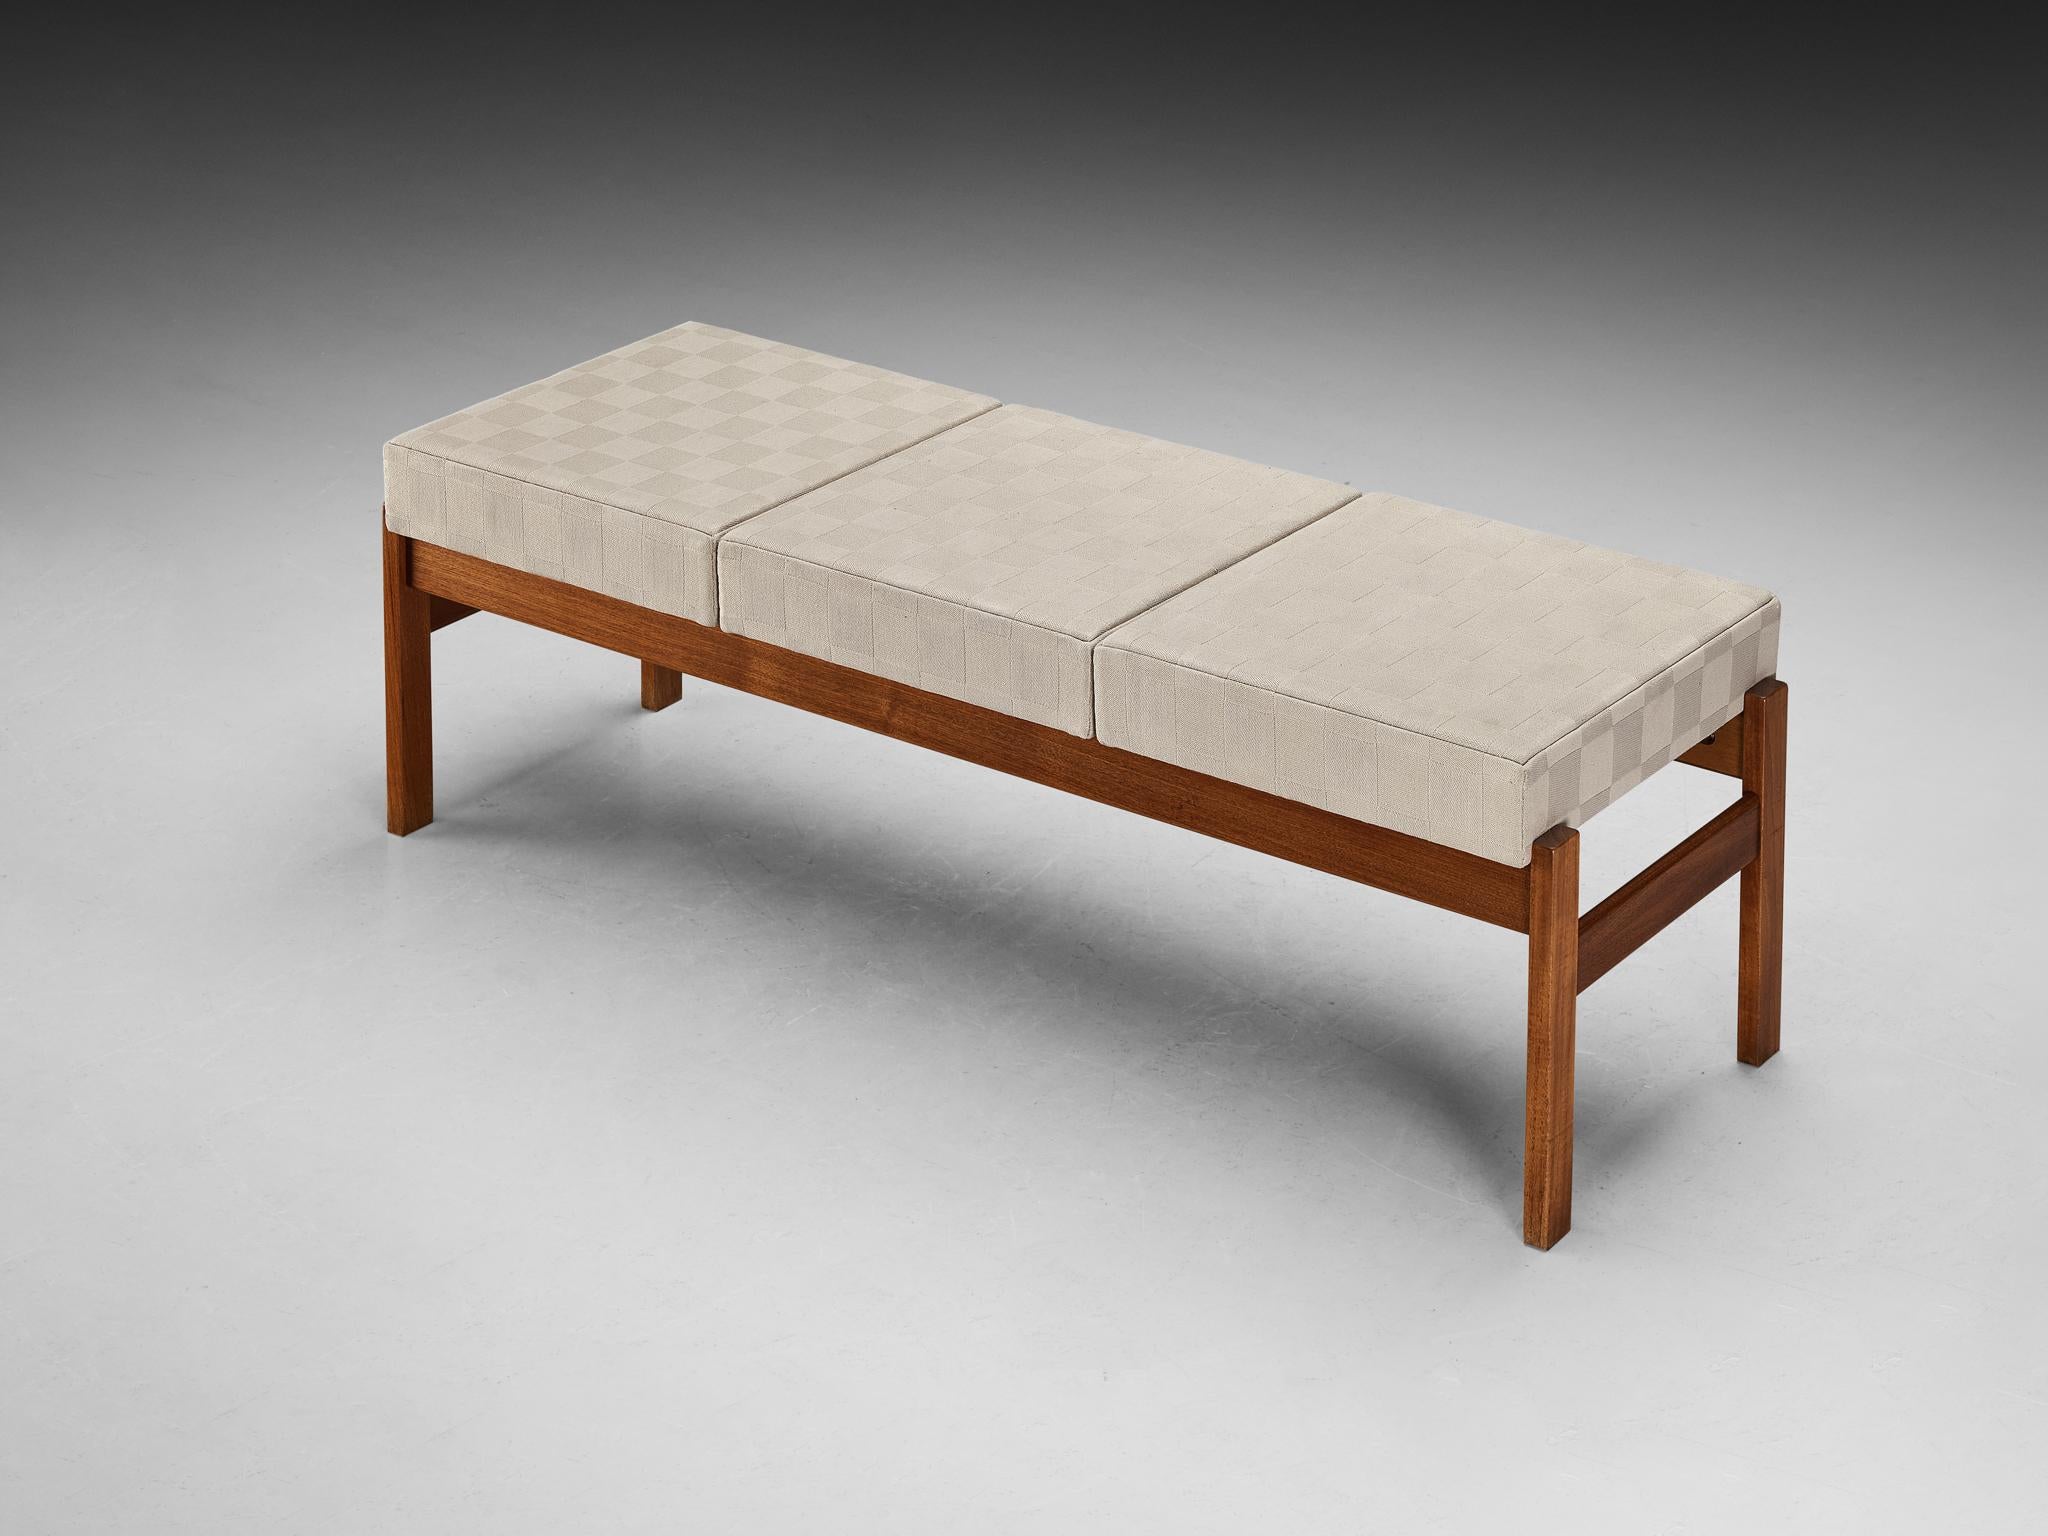 Bench, teak, fabric, Denmark, 1950s

A Scandinavian Modern furniture piece exuding a sense of harmony and purity. The bench, with its rectangular shape, showcases an upholstered seat in a checkered patterned fabric in a crème color. Crafted from